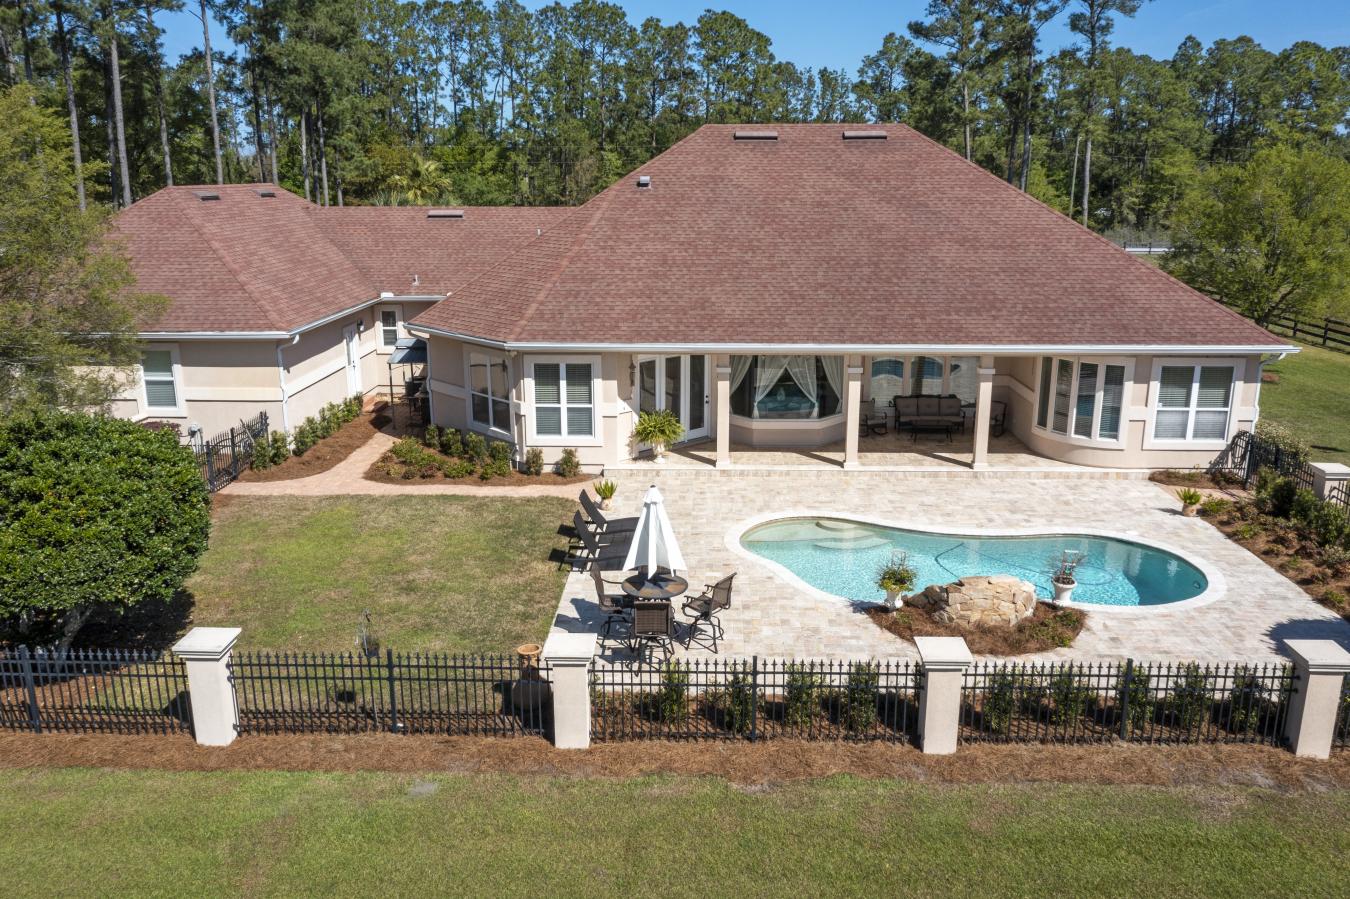 7600 Nutty Buddy Circle, GLEN ST. MARY, Florida, 32040, United States, 3 Bedrooms Bedrooms, ,3 BathroomsBathrooms,Residential,For Sale,7600 Nutty Buddy Circle,1246038